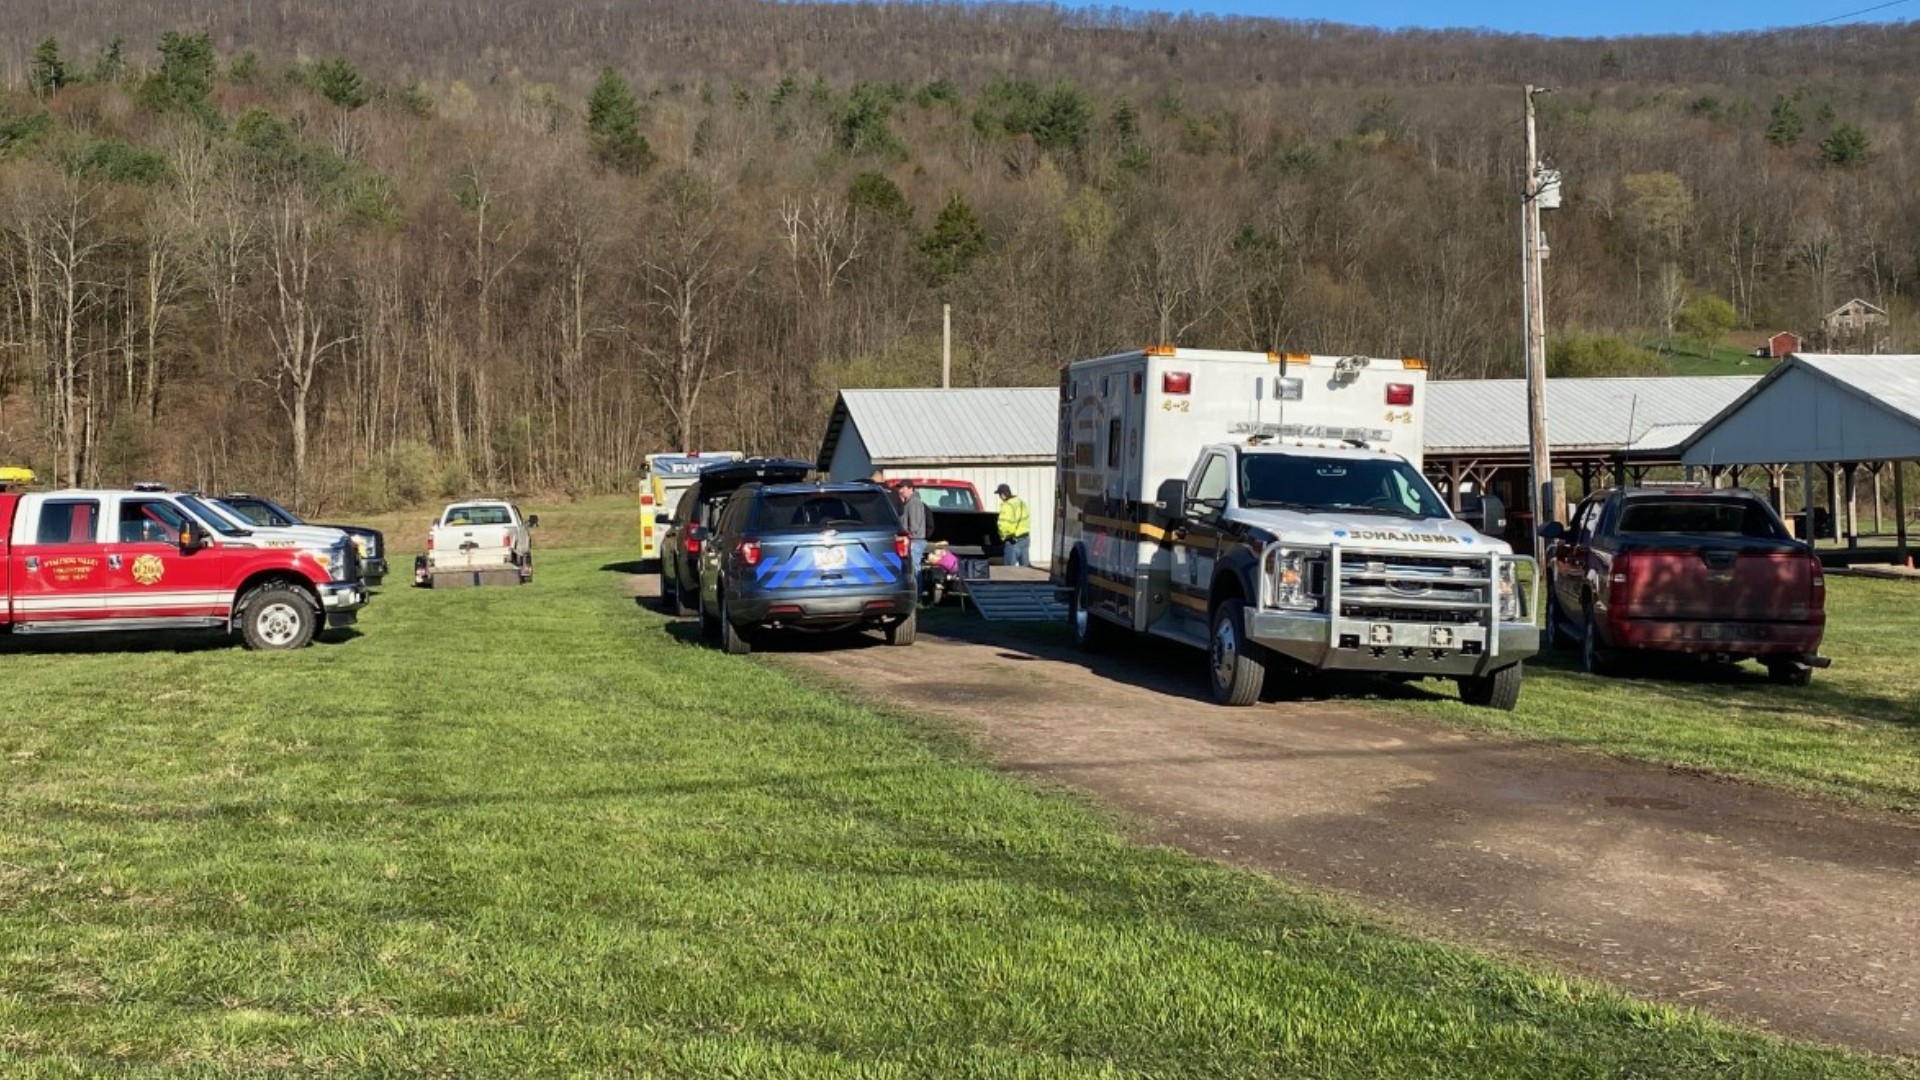 Investigators confirm the helicopter went down in North Branch Township in Wyoming County after 9:30 p.m. Thursday.